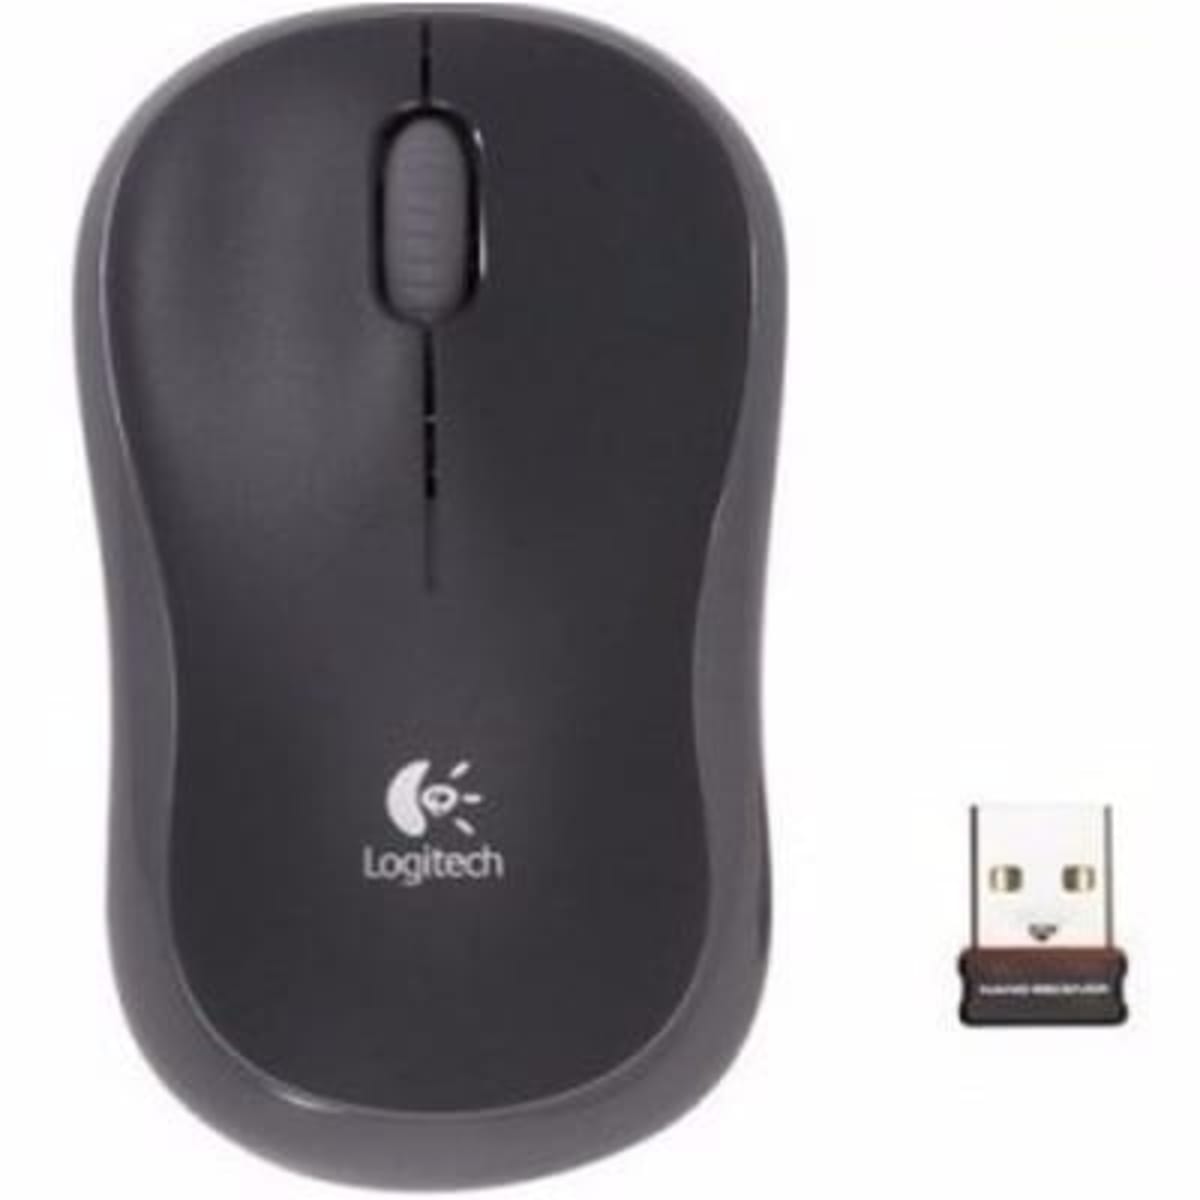 Logitech M185 Plug-and-Play Wireless Mouse Plus Comfort (Black)